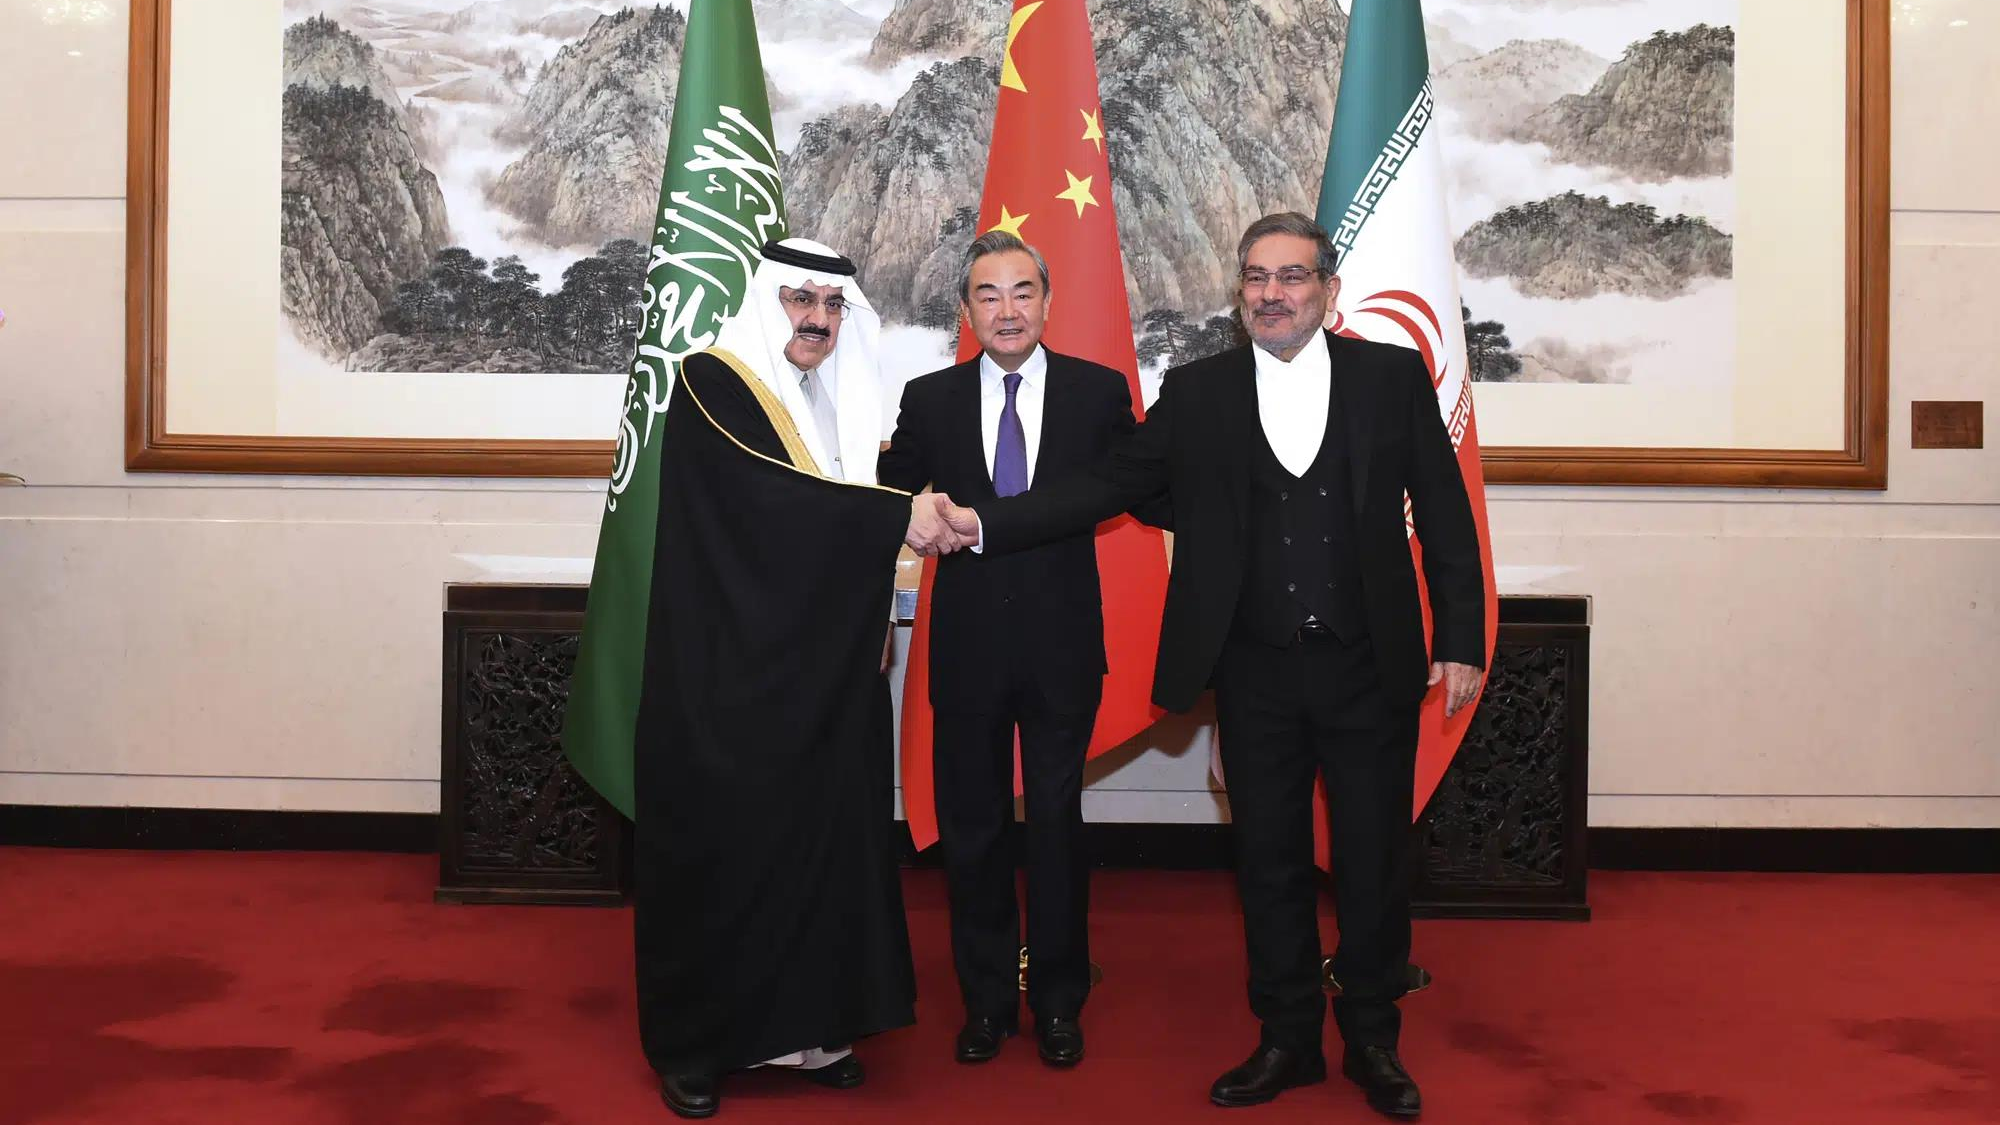 Admiral Ali Shamkhani (R), secretary of the Supreme National Security Council of Iran, shakes hands with Musaad bin Mohammed Al-Aiban (L), Saudi Arabia's Minister of State, as Wang Yi (C), then director of the Office of the Foreign Affairs Commission of the Communist Party of China Central Committee, looks on for a photo during a meeting in Beijing, China, March 10, 2023. /Xinhua